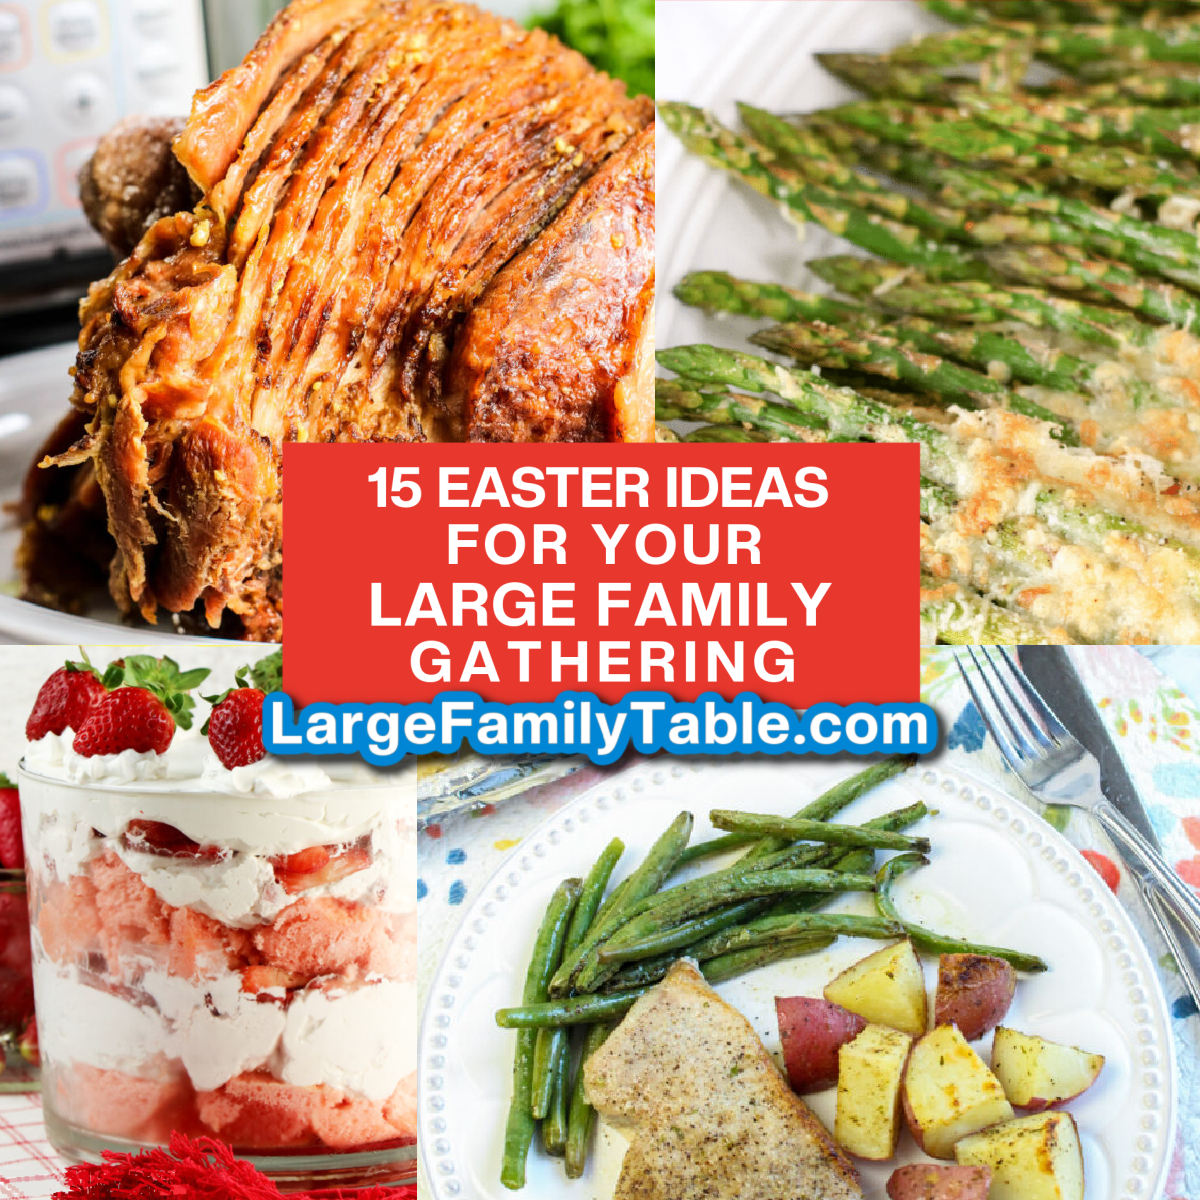 15 Easter Ideas for your Large Family Gathering